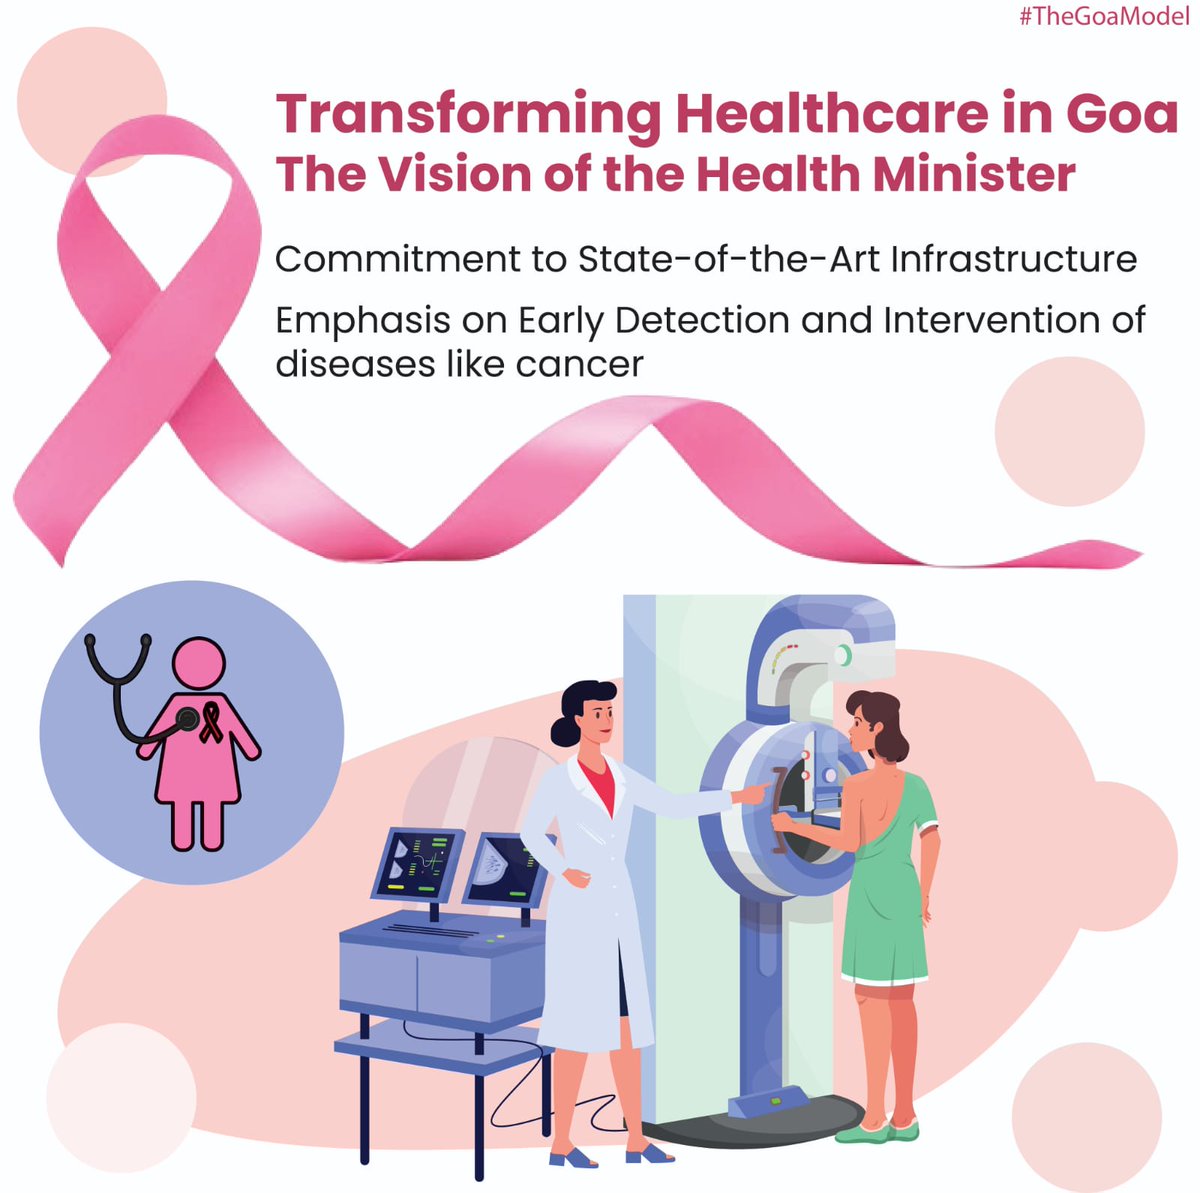 The Health Minister of Goa is dedicated to ensuring state-of-the-art healthcare infrastructure across the state, prioritizing early detection and intervention strategies for a healthier future. #TheGoaModel #Healthcare #GoaHealthcare
#HealthMinister #GoaHealthcare